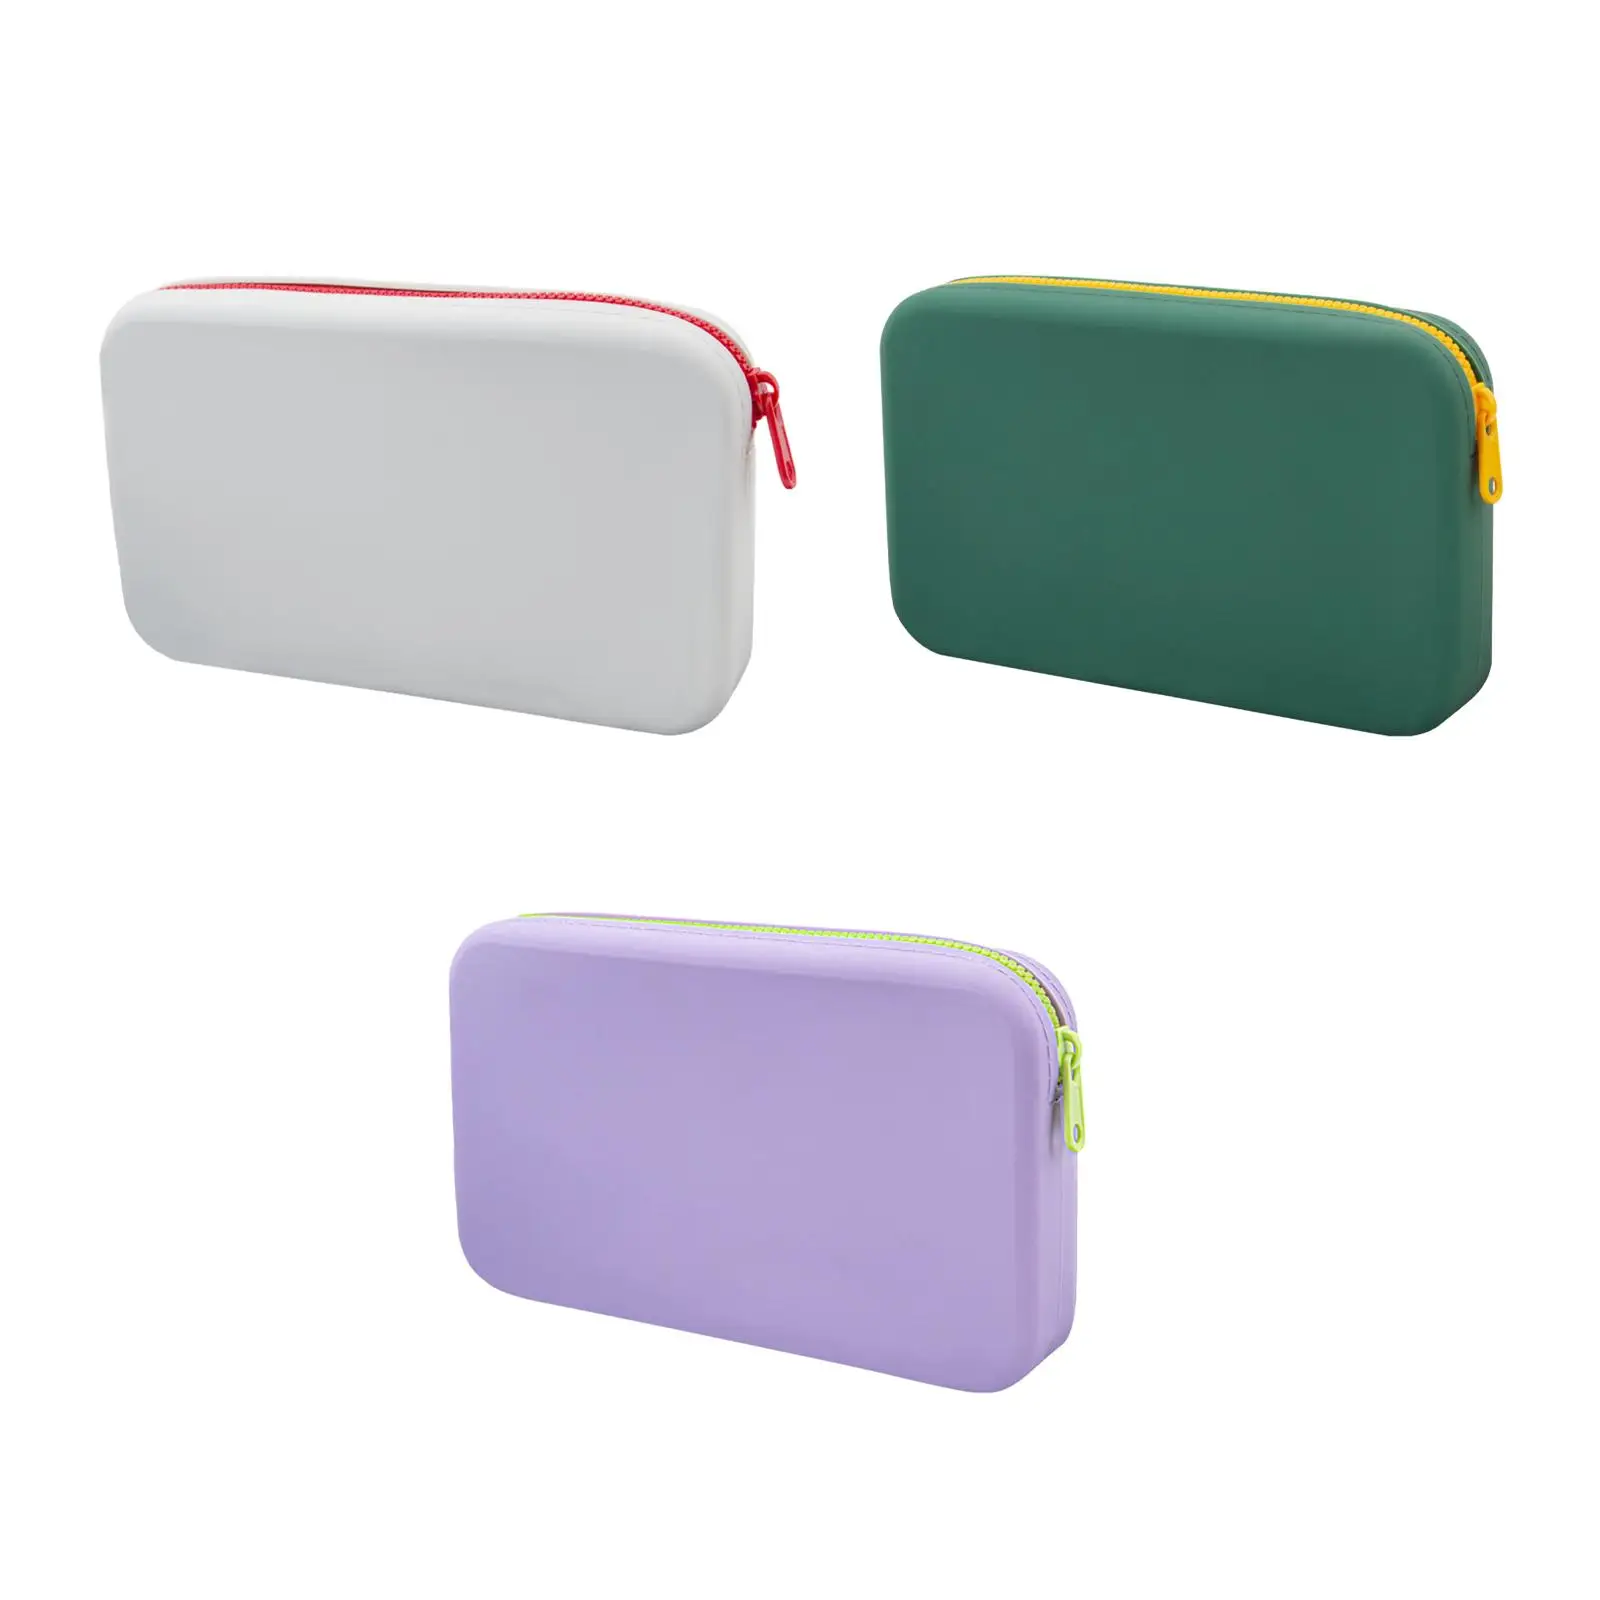 Makeup Bag Cosmetic Storage Bag Toiletry Bags Makeup Brush Holder Cosmetic Organizer for Toiletries Traveling Beach Home Gym